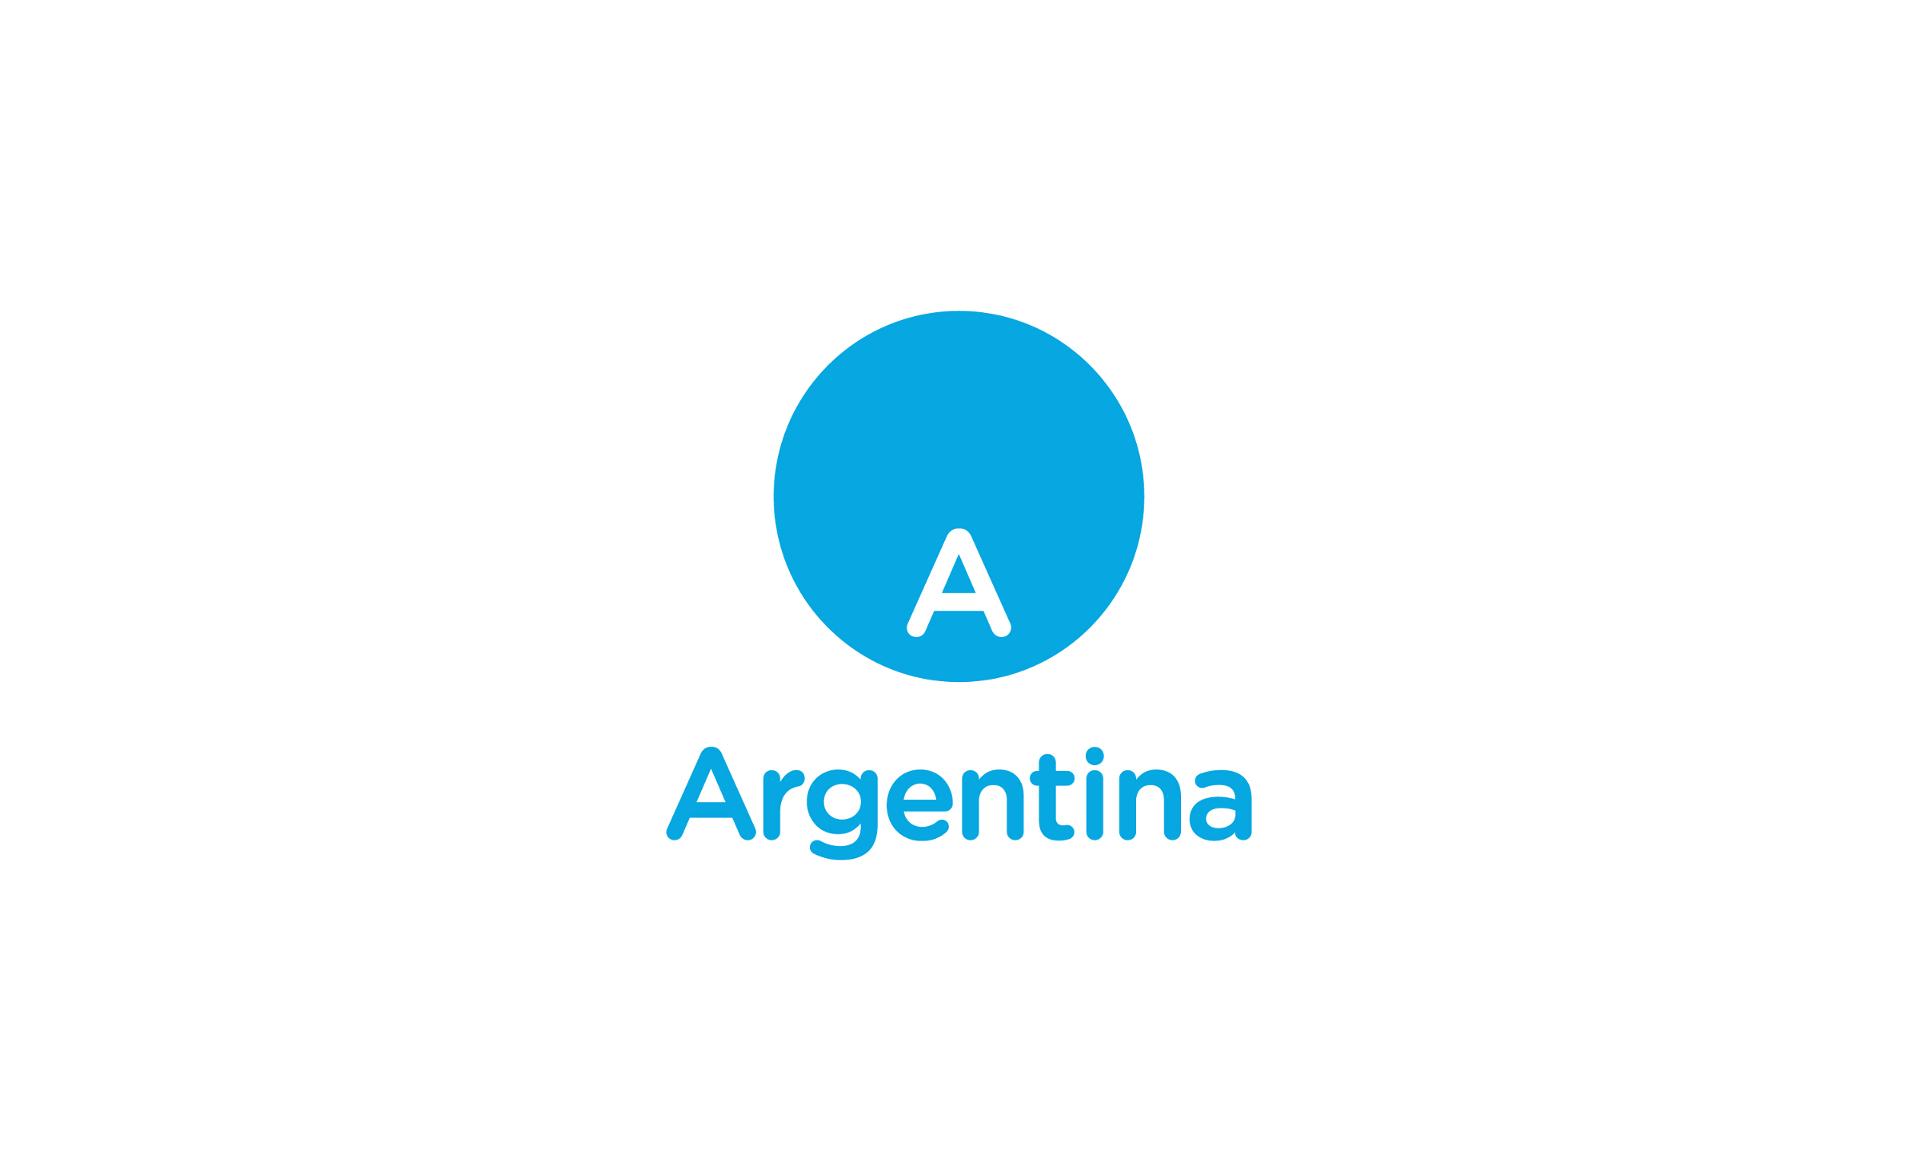 Modern Country Logo - Argentina launches new country branding with a modern logo ...